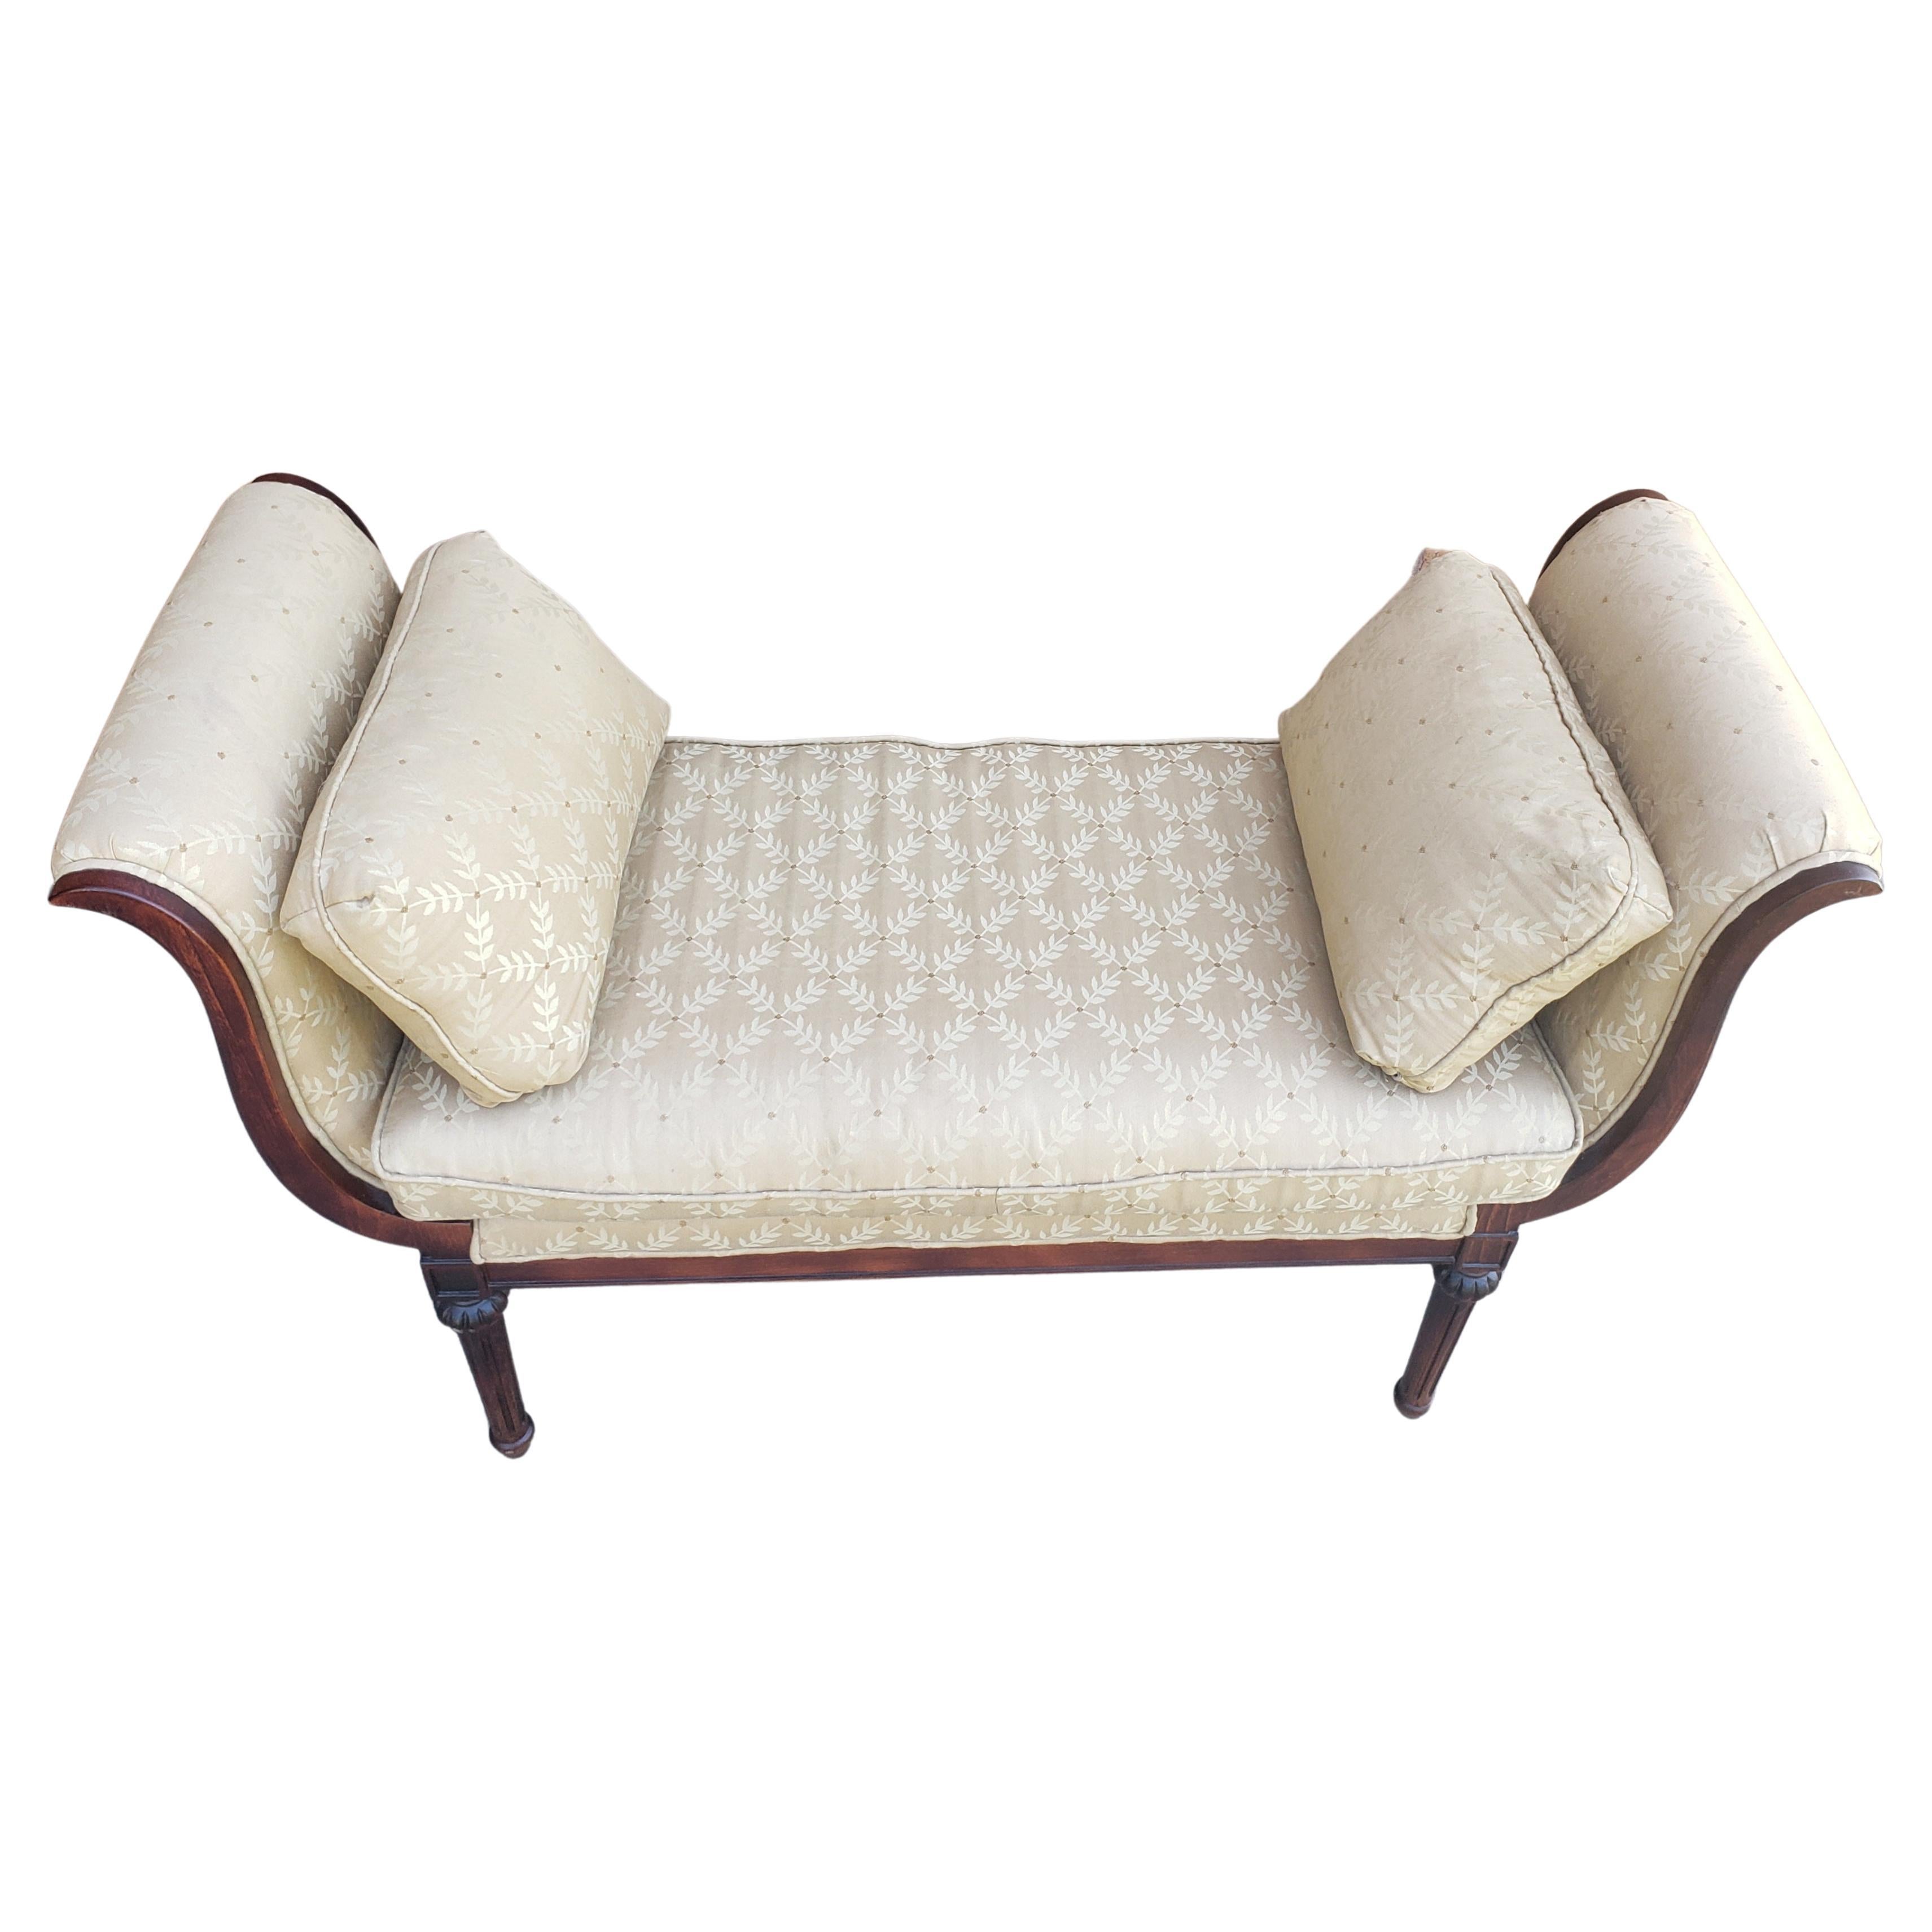 Louis XVI style scroll arms mahogany and upholstered window bench with two pillows.
Measures 51